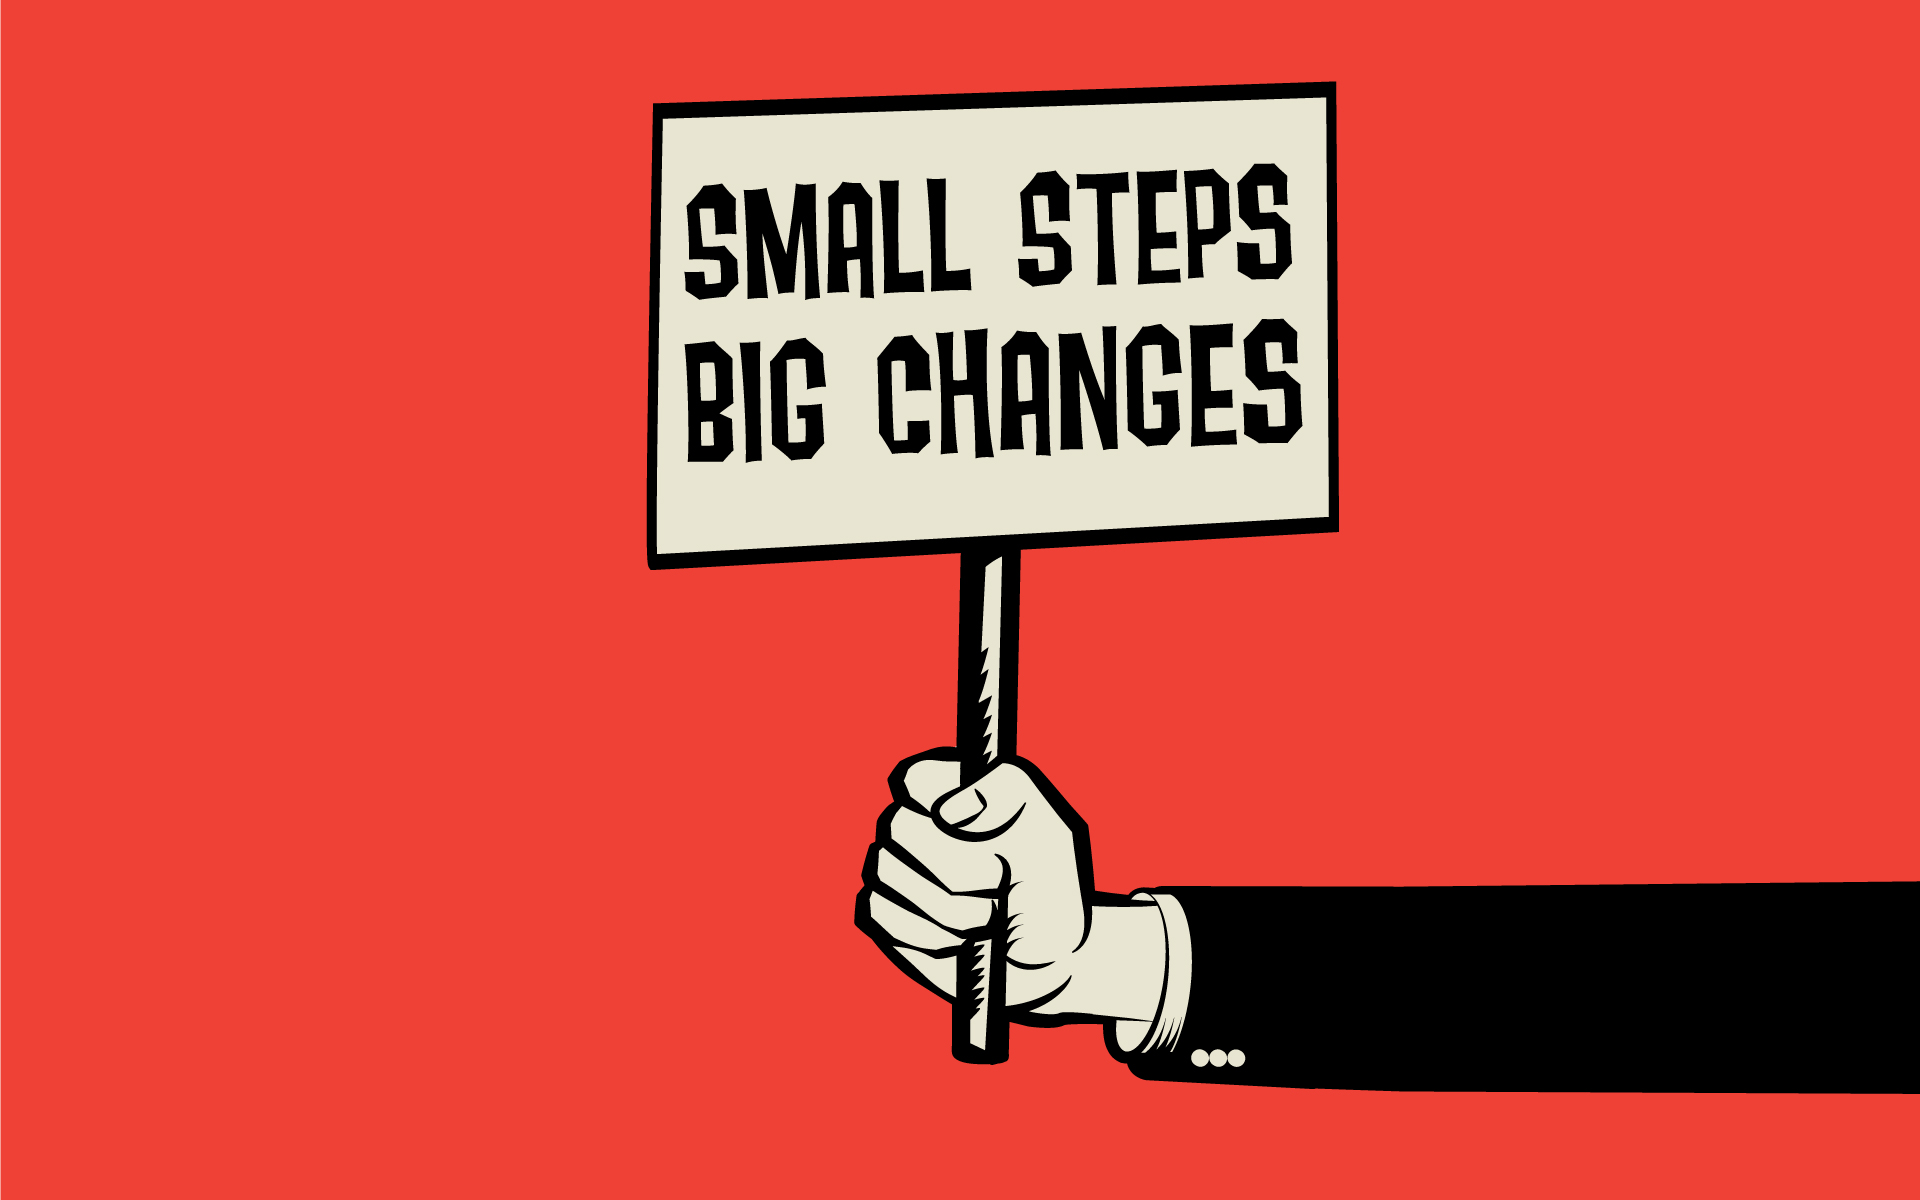 Small steps big changes